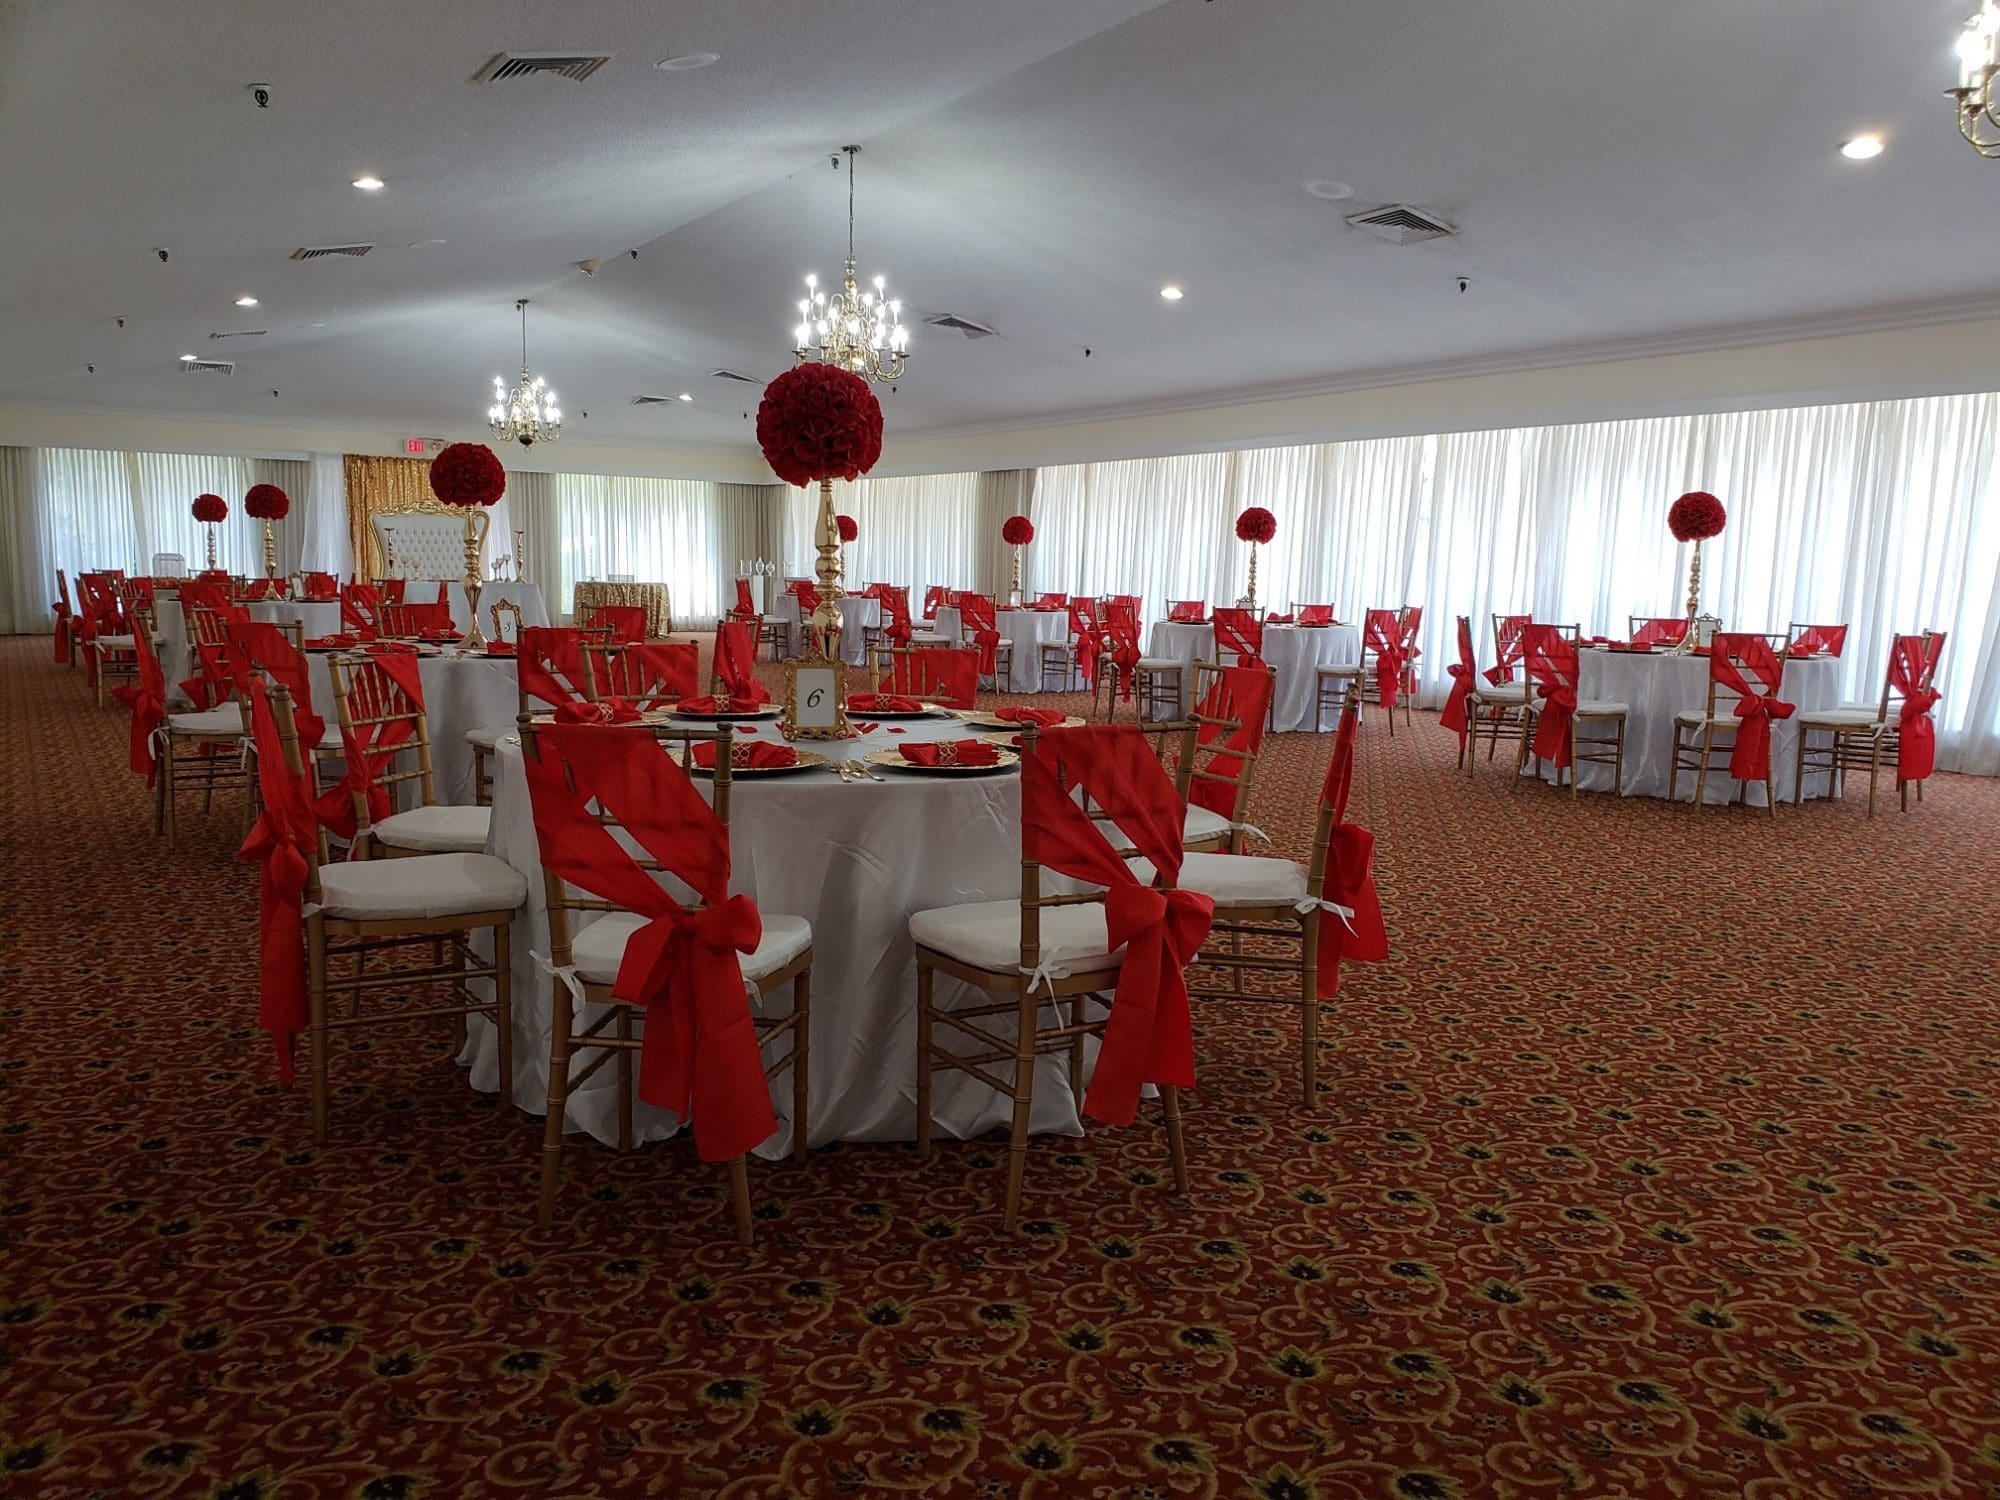 Rio Pinar Golf Club - large reception hall with white and red decor